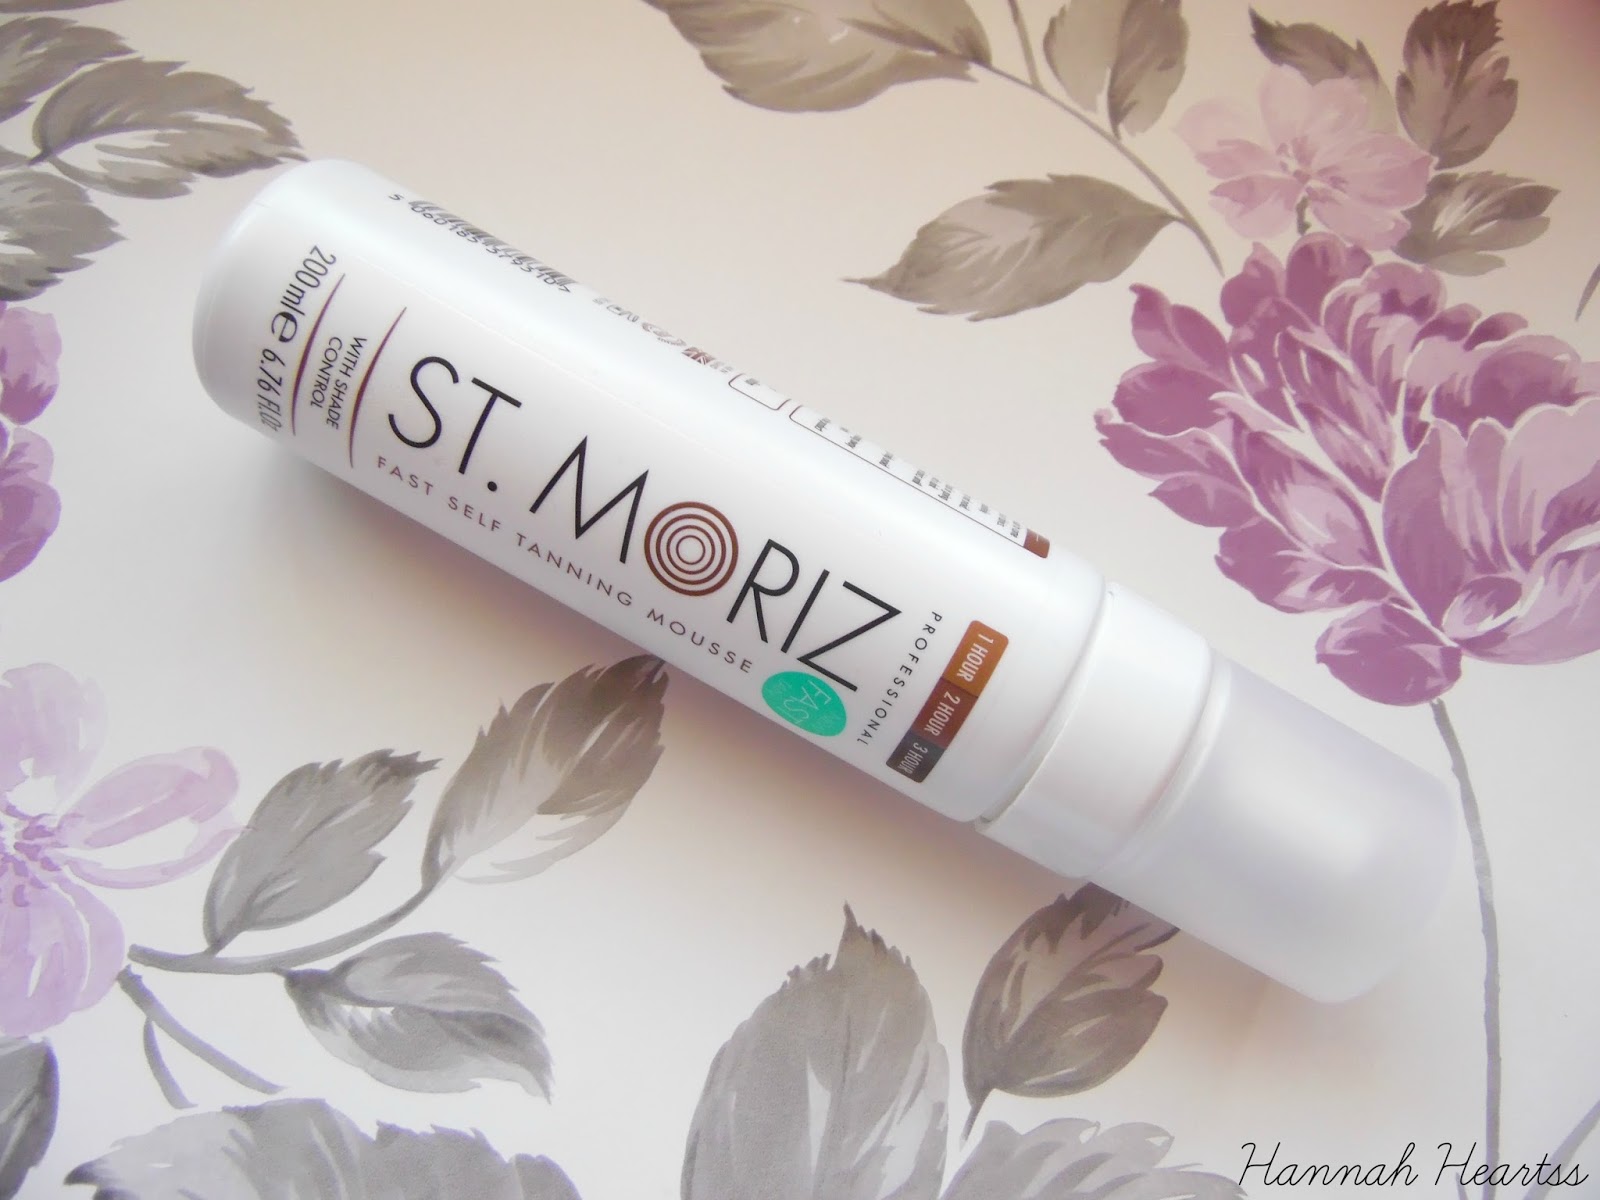 St Moriz Fast Self Tanning Mousse Review